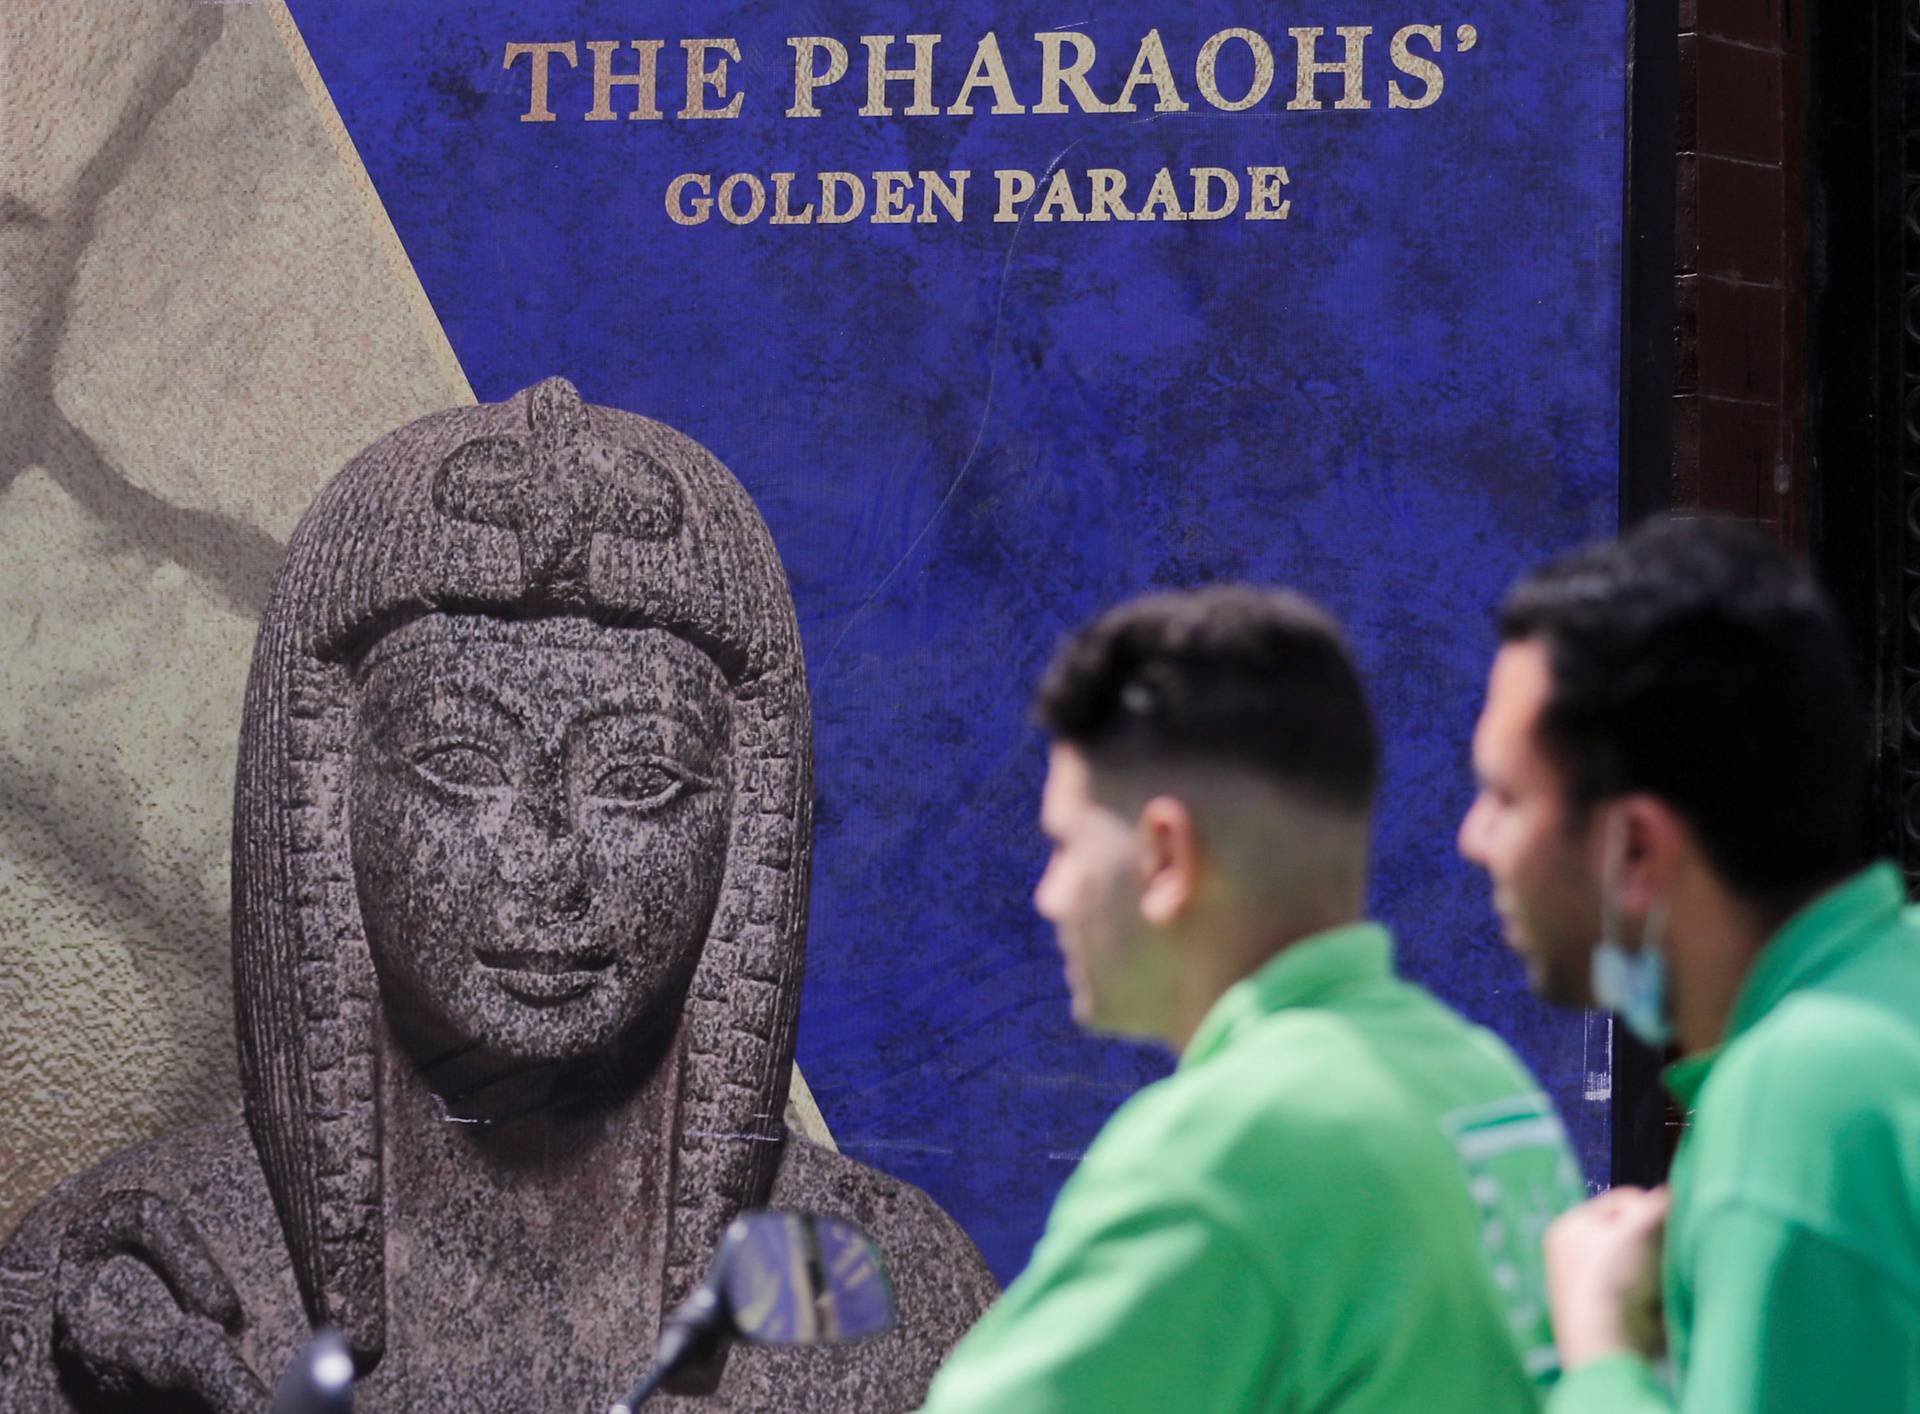 FILE PHOTO: Men pass in front of poster for pharaohs golden parade in Cairo